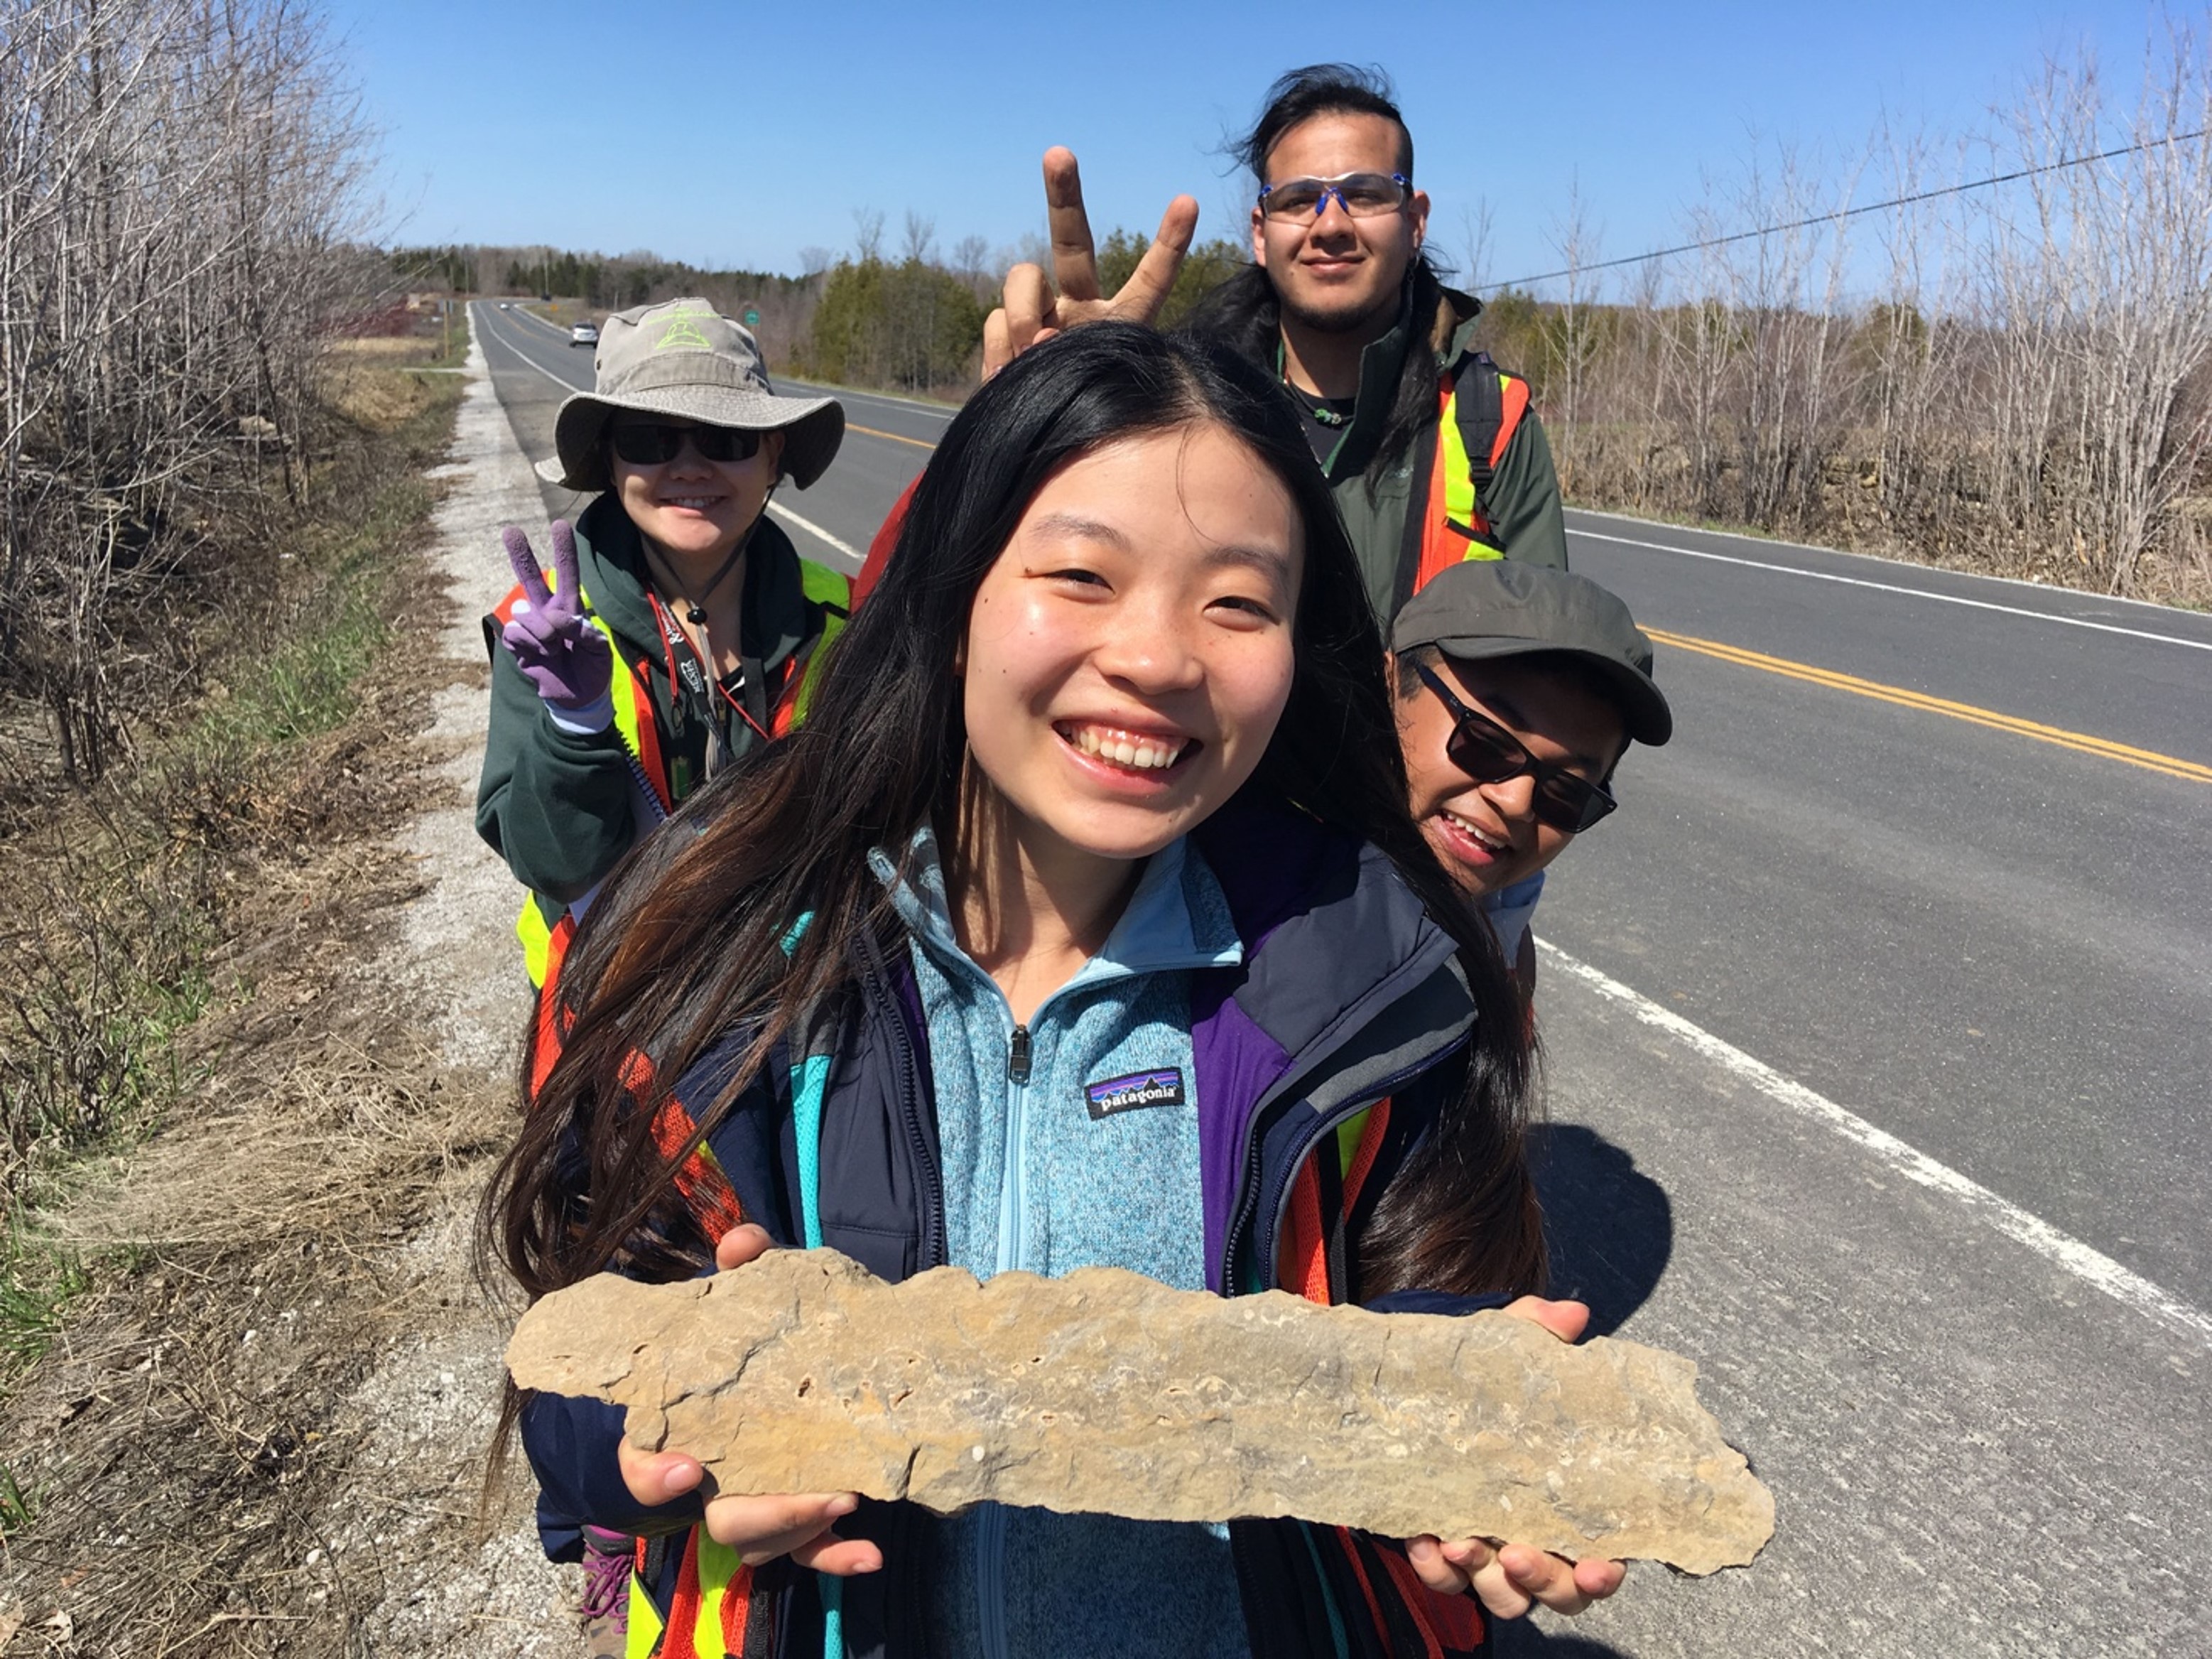 a smiling student holding a rock sample while friends do fun poses around them